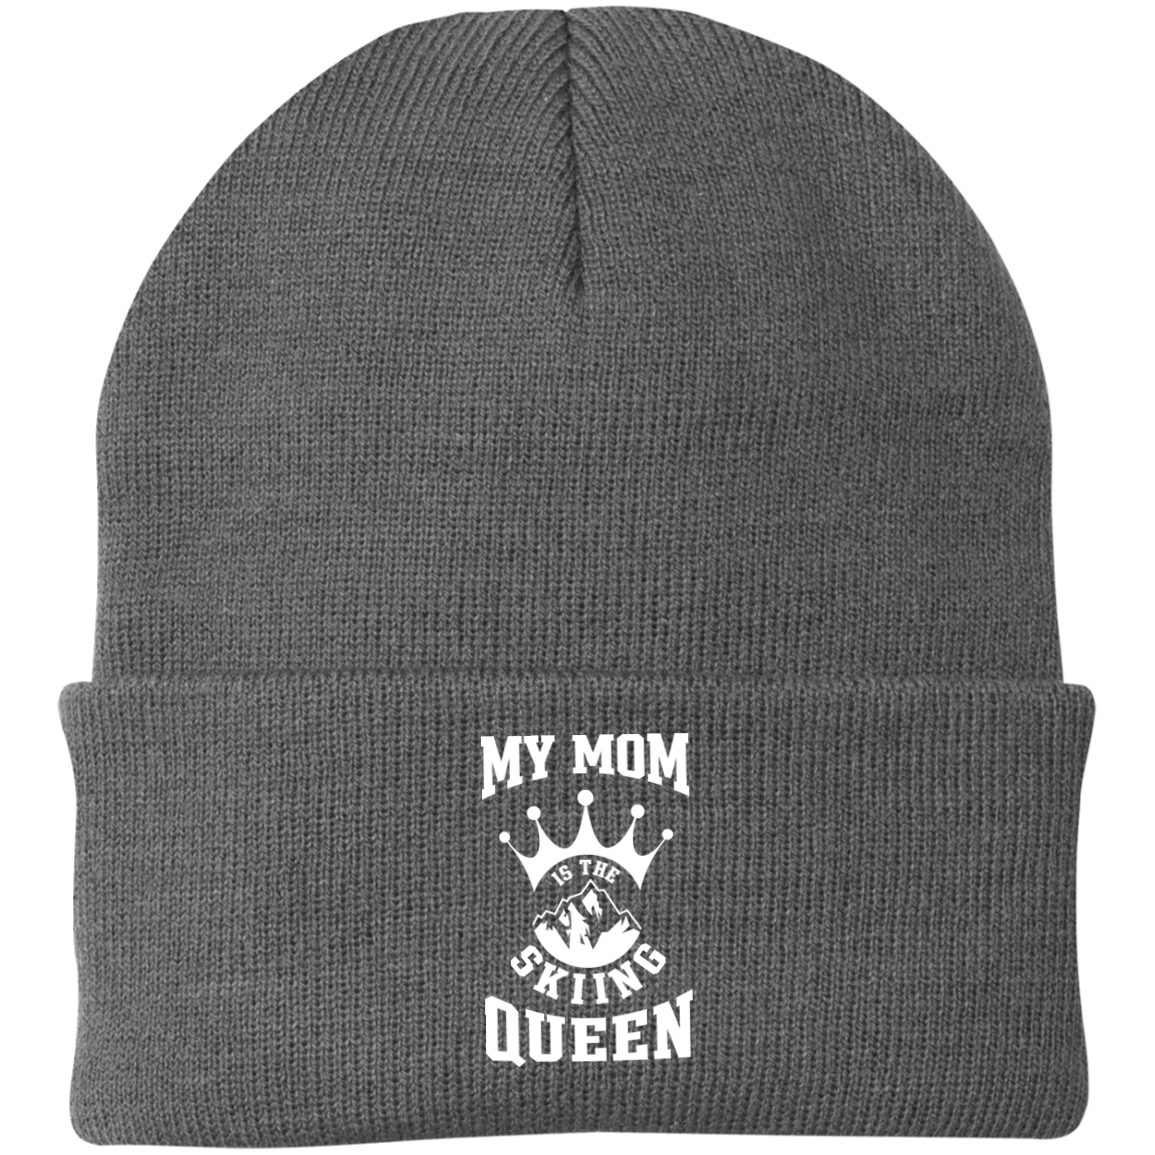 My Mom is The Skiing Queen Knit Cap - Powderaddicts